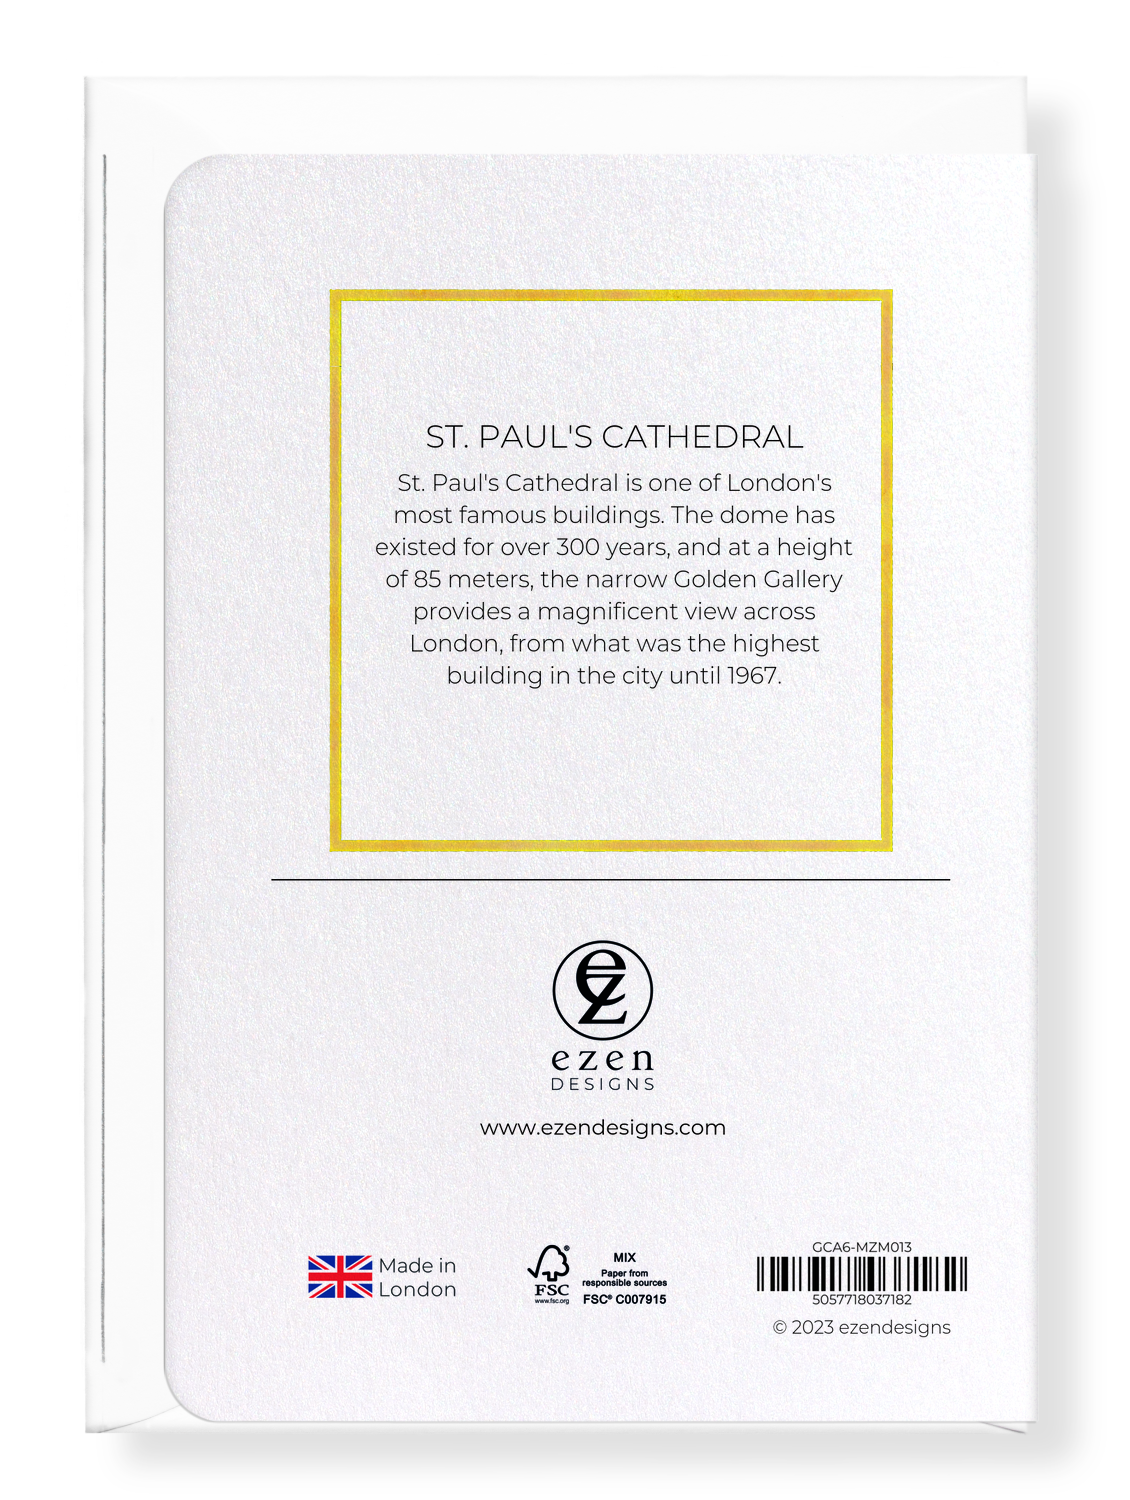 Ezen Designs - St. Paul's Cathedral - Greeting Card - Back